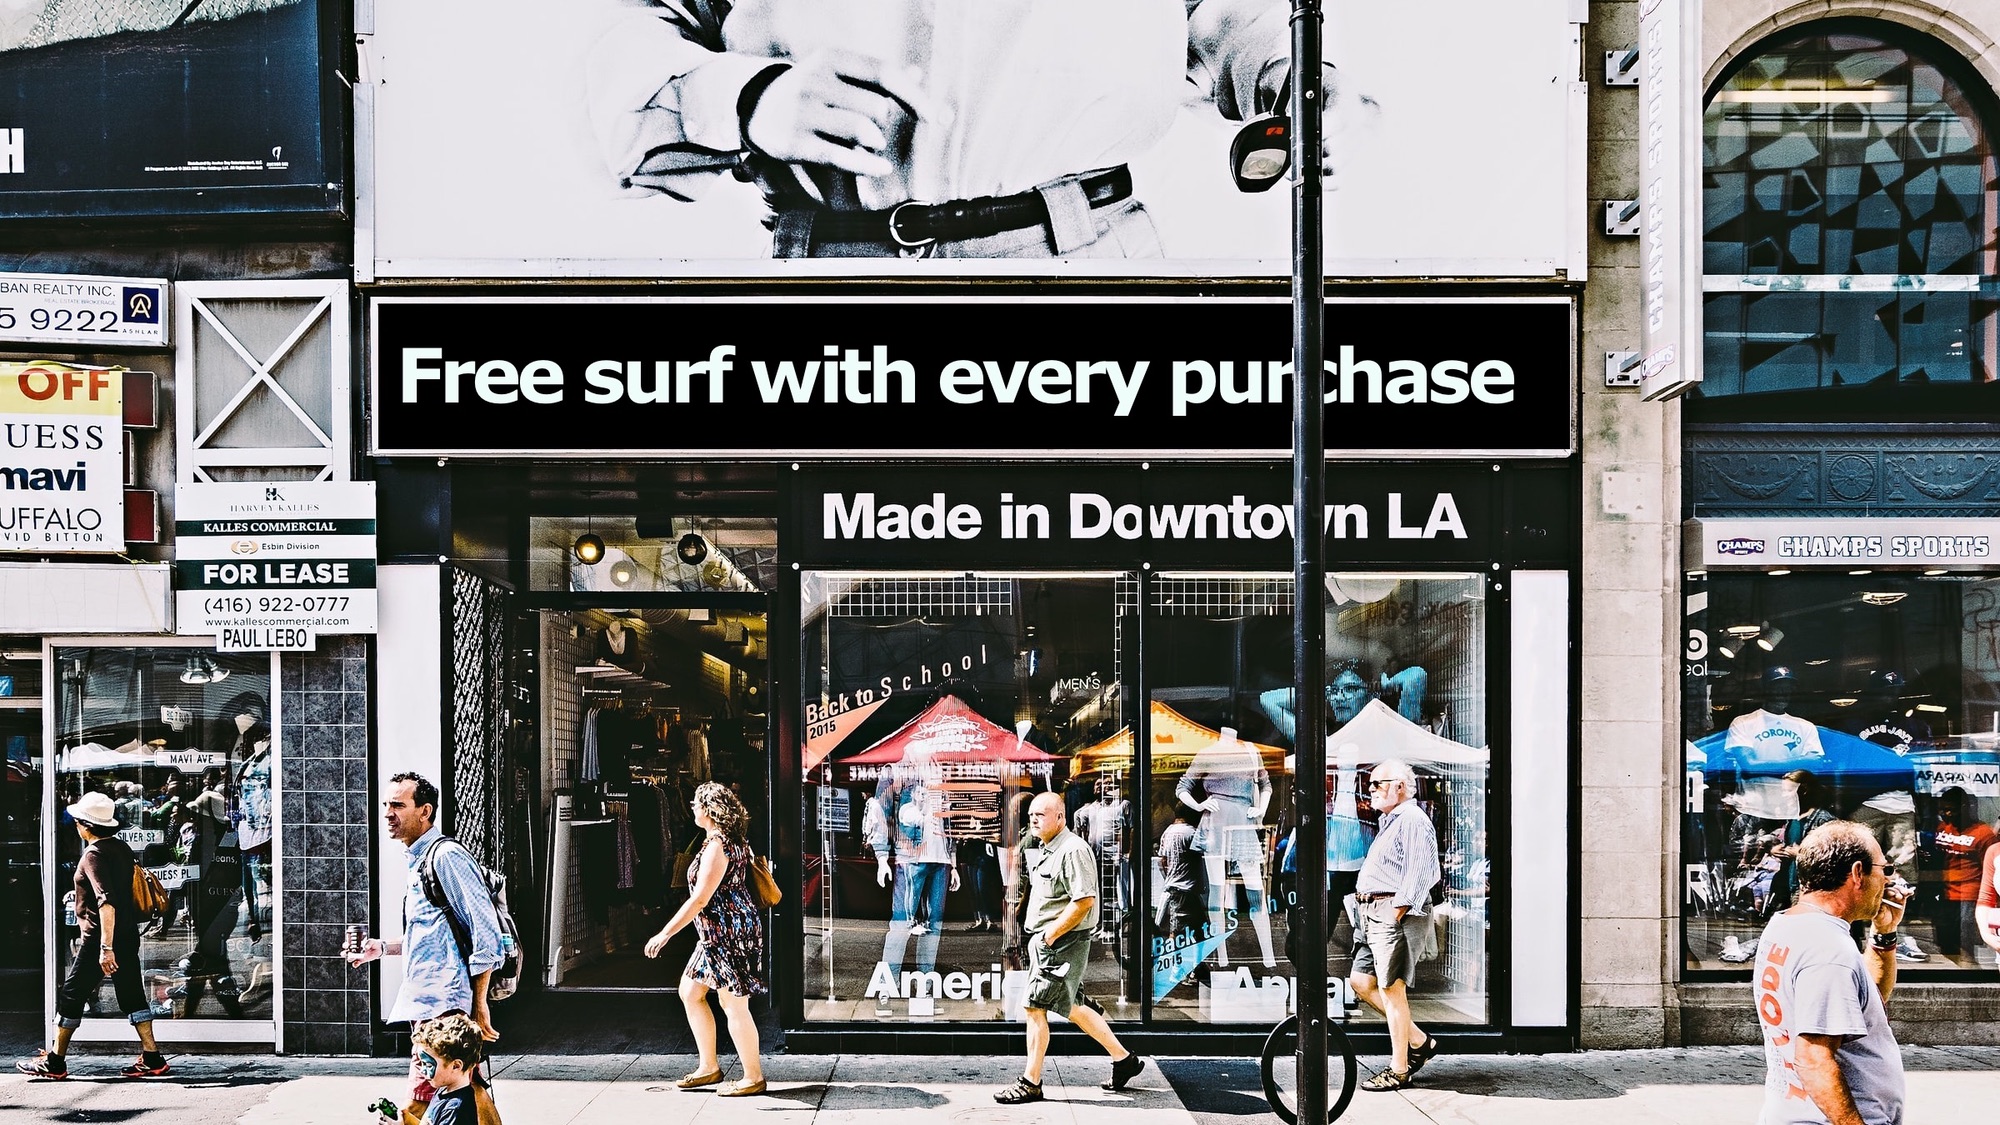 Free surf with every purchase